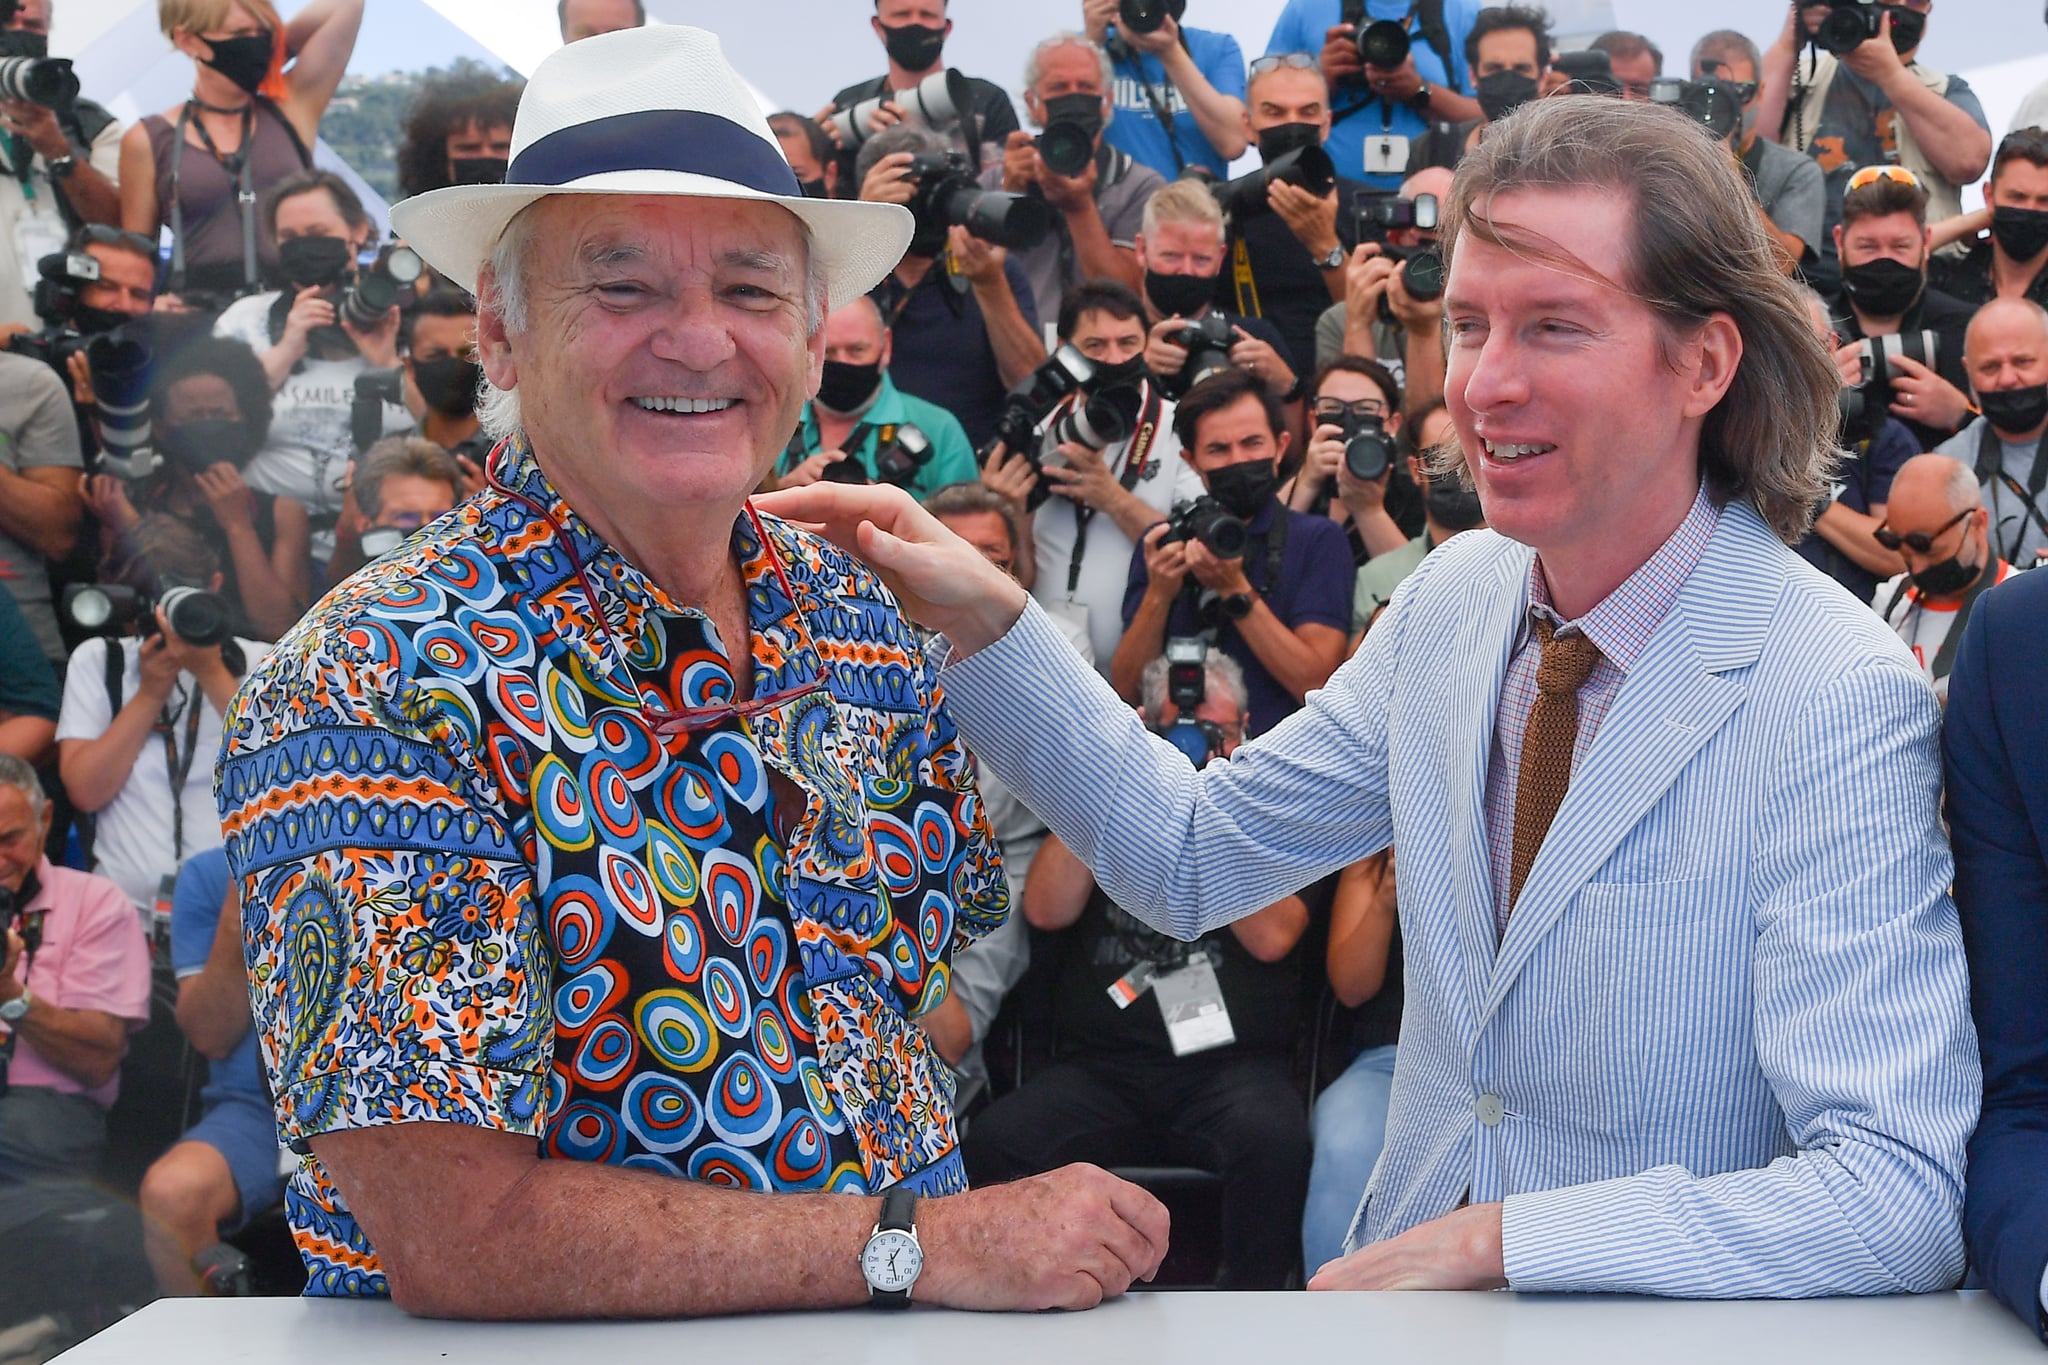 CANNES, FRANCE - JULY 13: Bill Murray and Director Wes Anderson attend the 